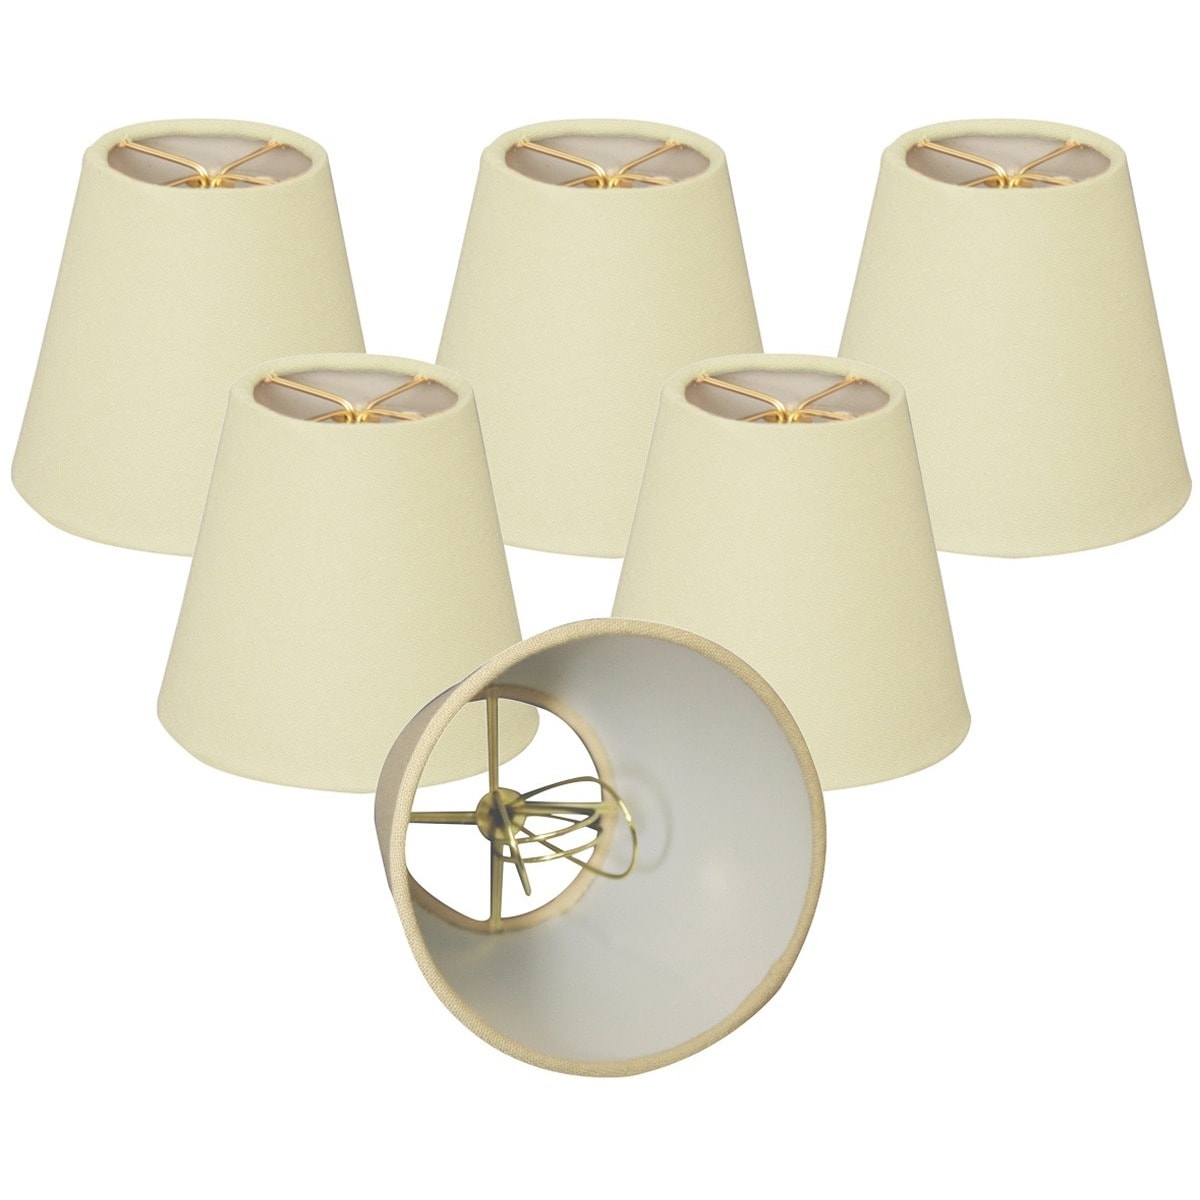 3.5-inch by 4.5-inch by 4.5-inch Meriville Set of 6 Off White Faux Silk Clip On Chandelier Lamp Shades